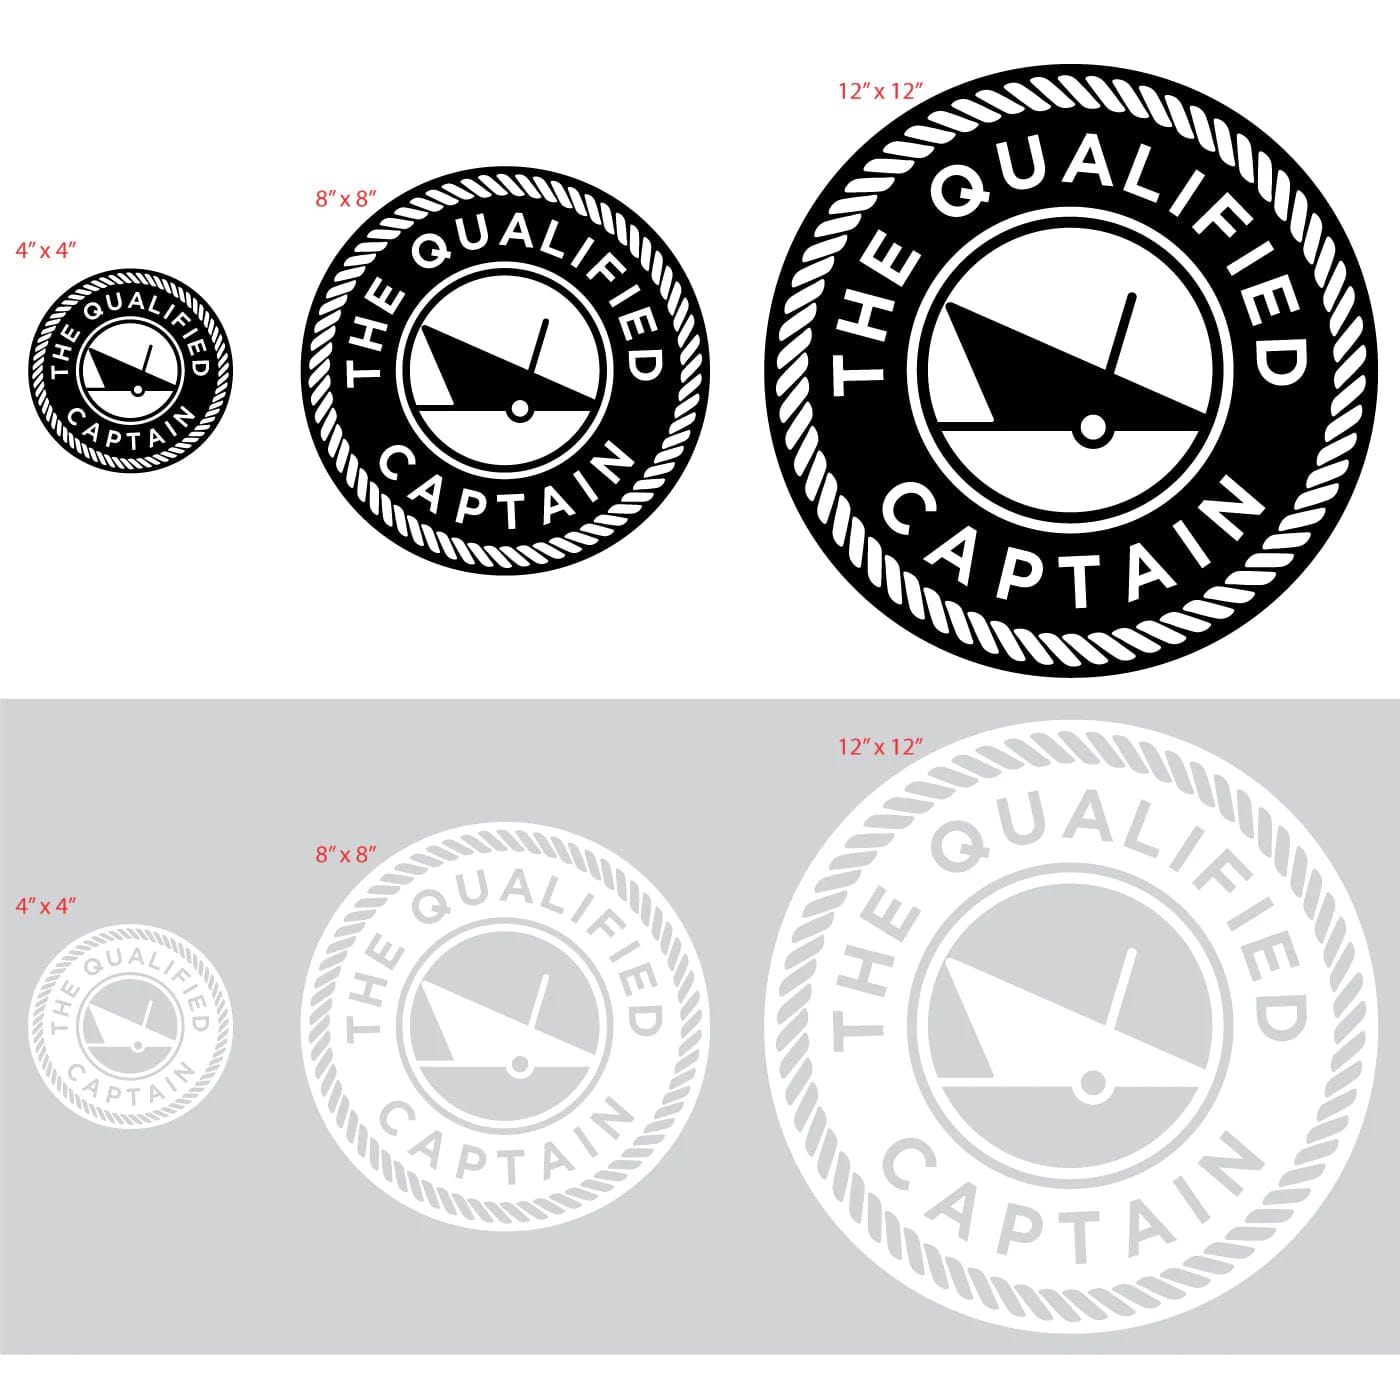 The Qualified Captain Vinyl Decal - The Saltwater Edge